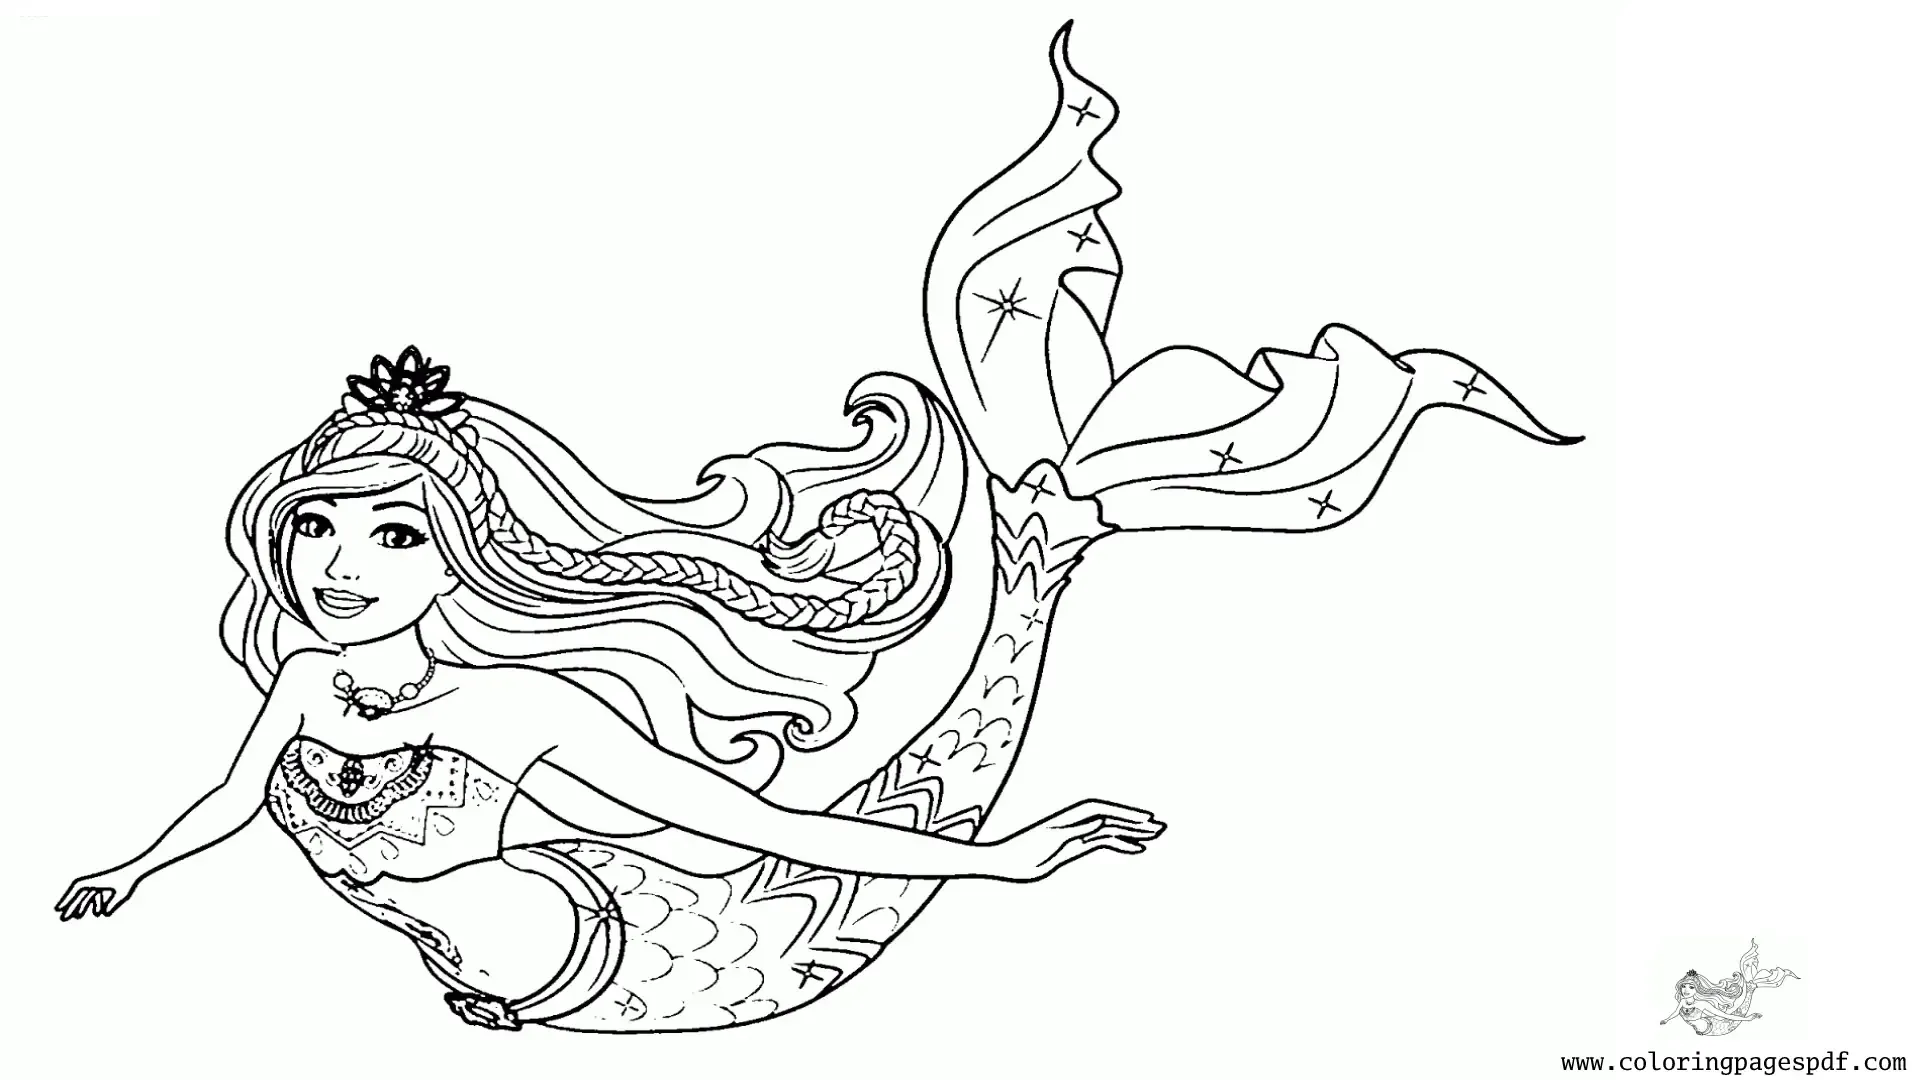 Coloring Page Of A Mermaid Swimming